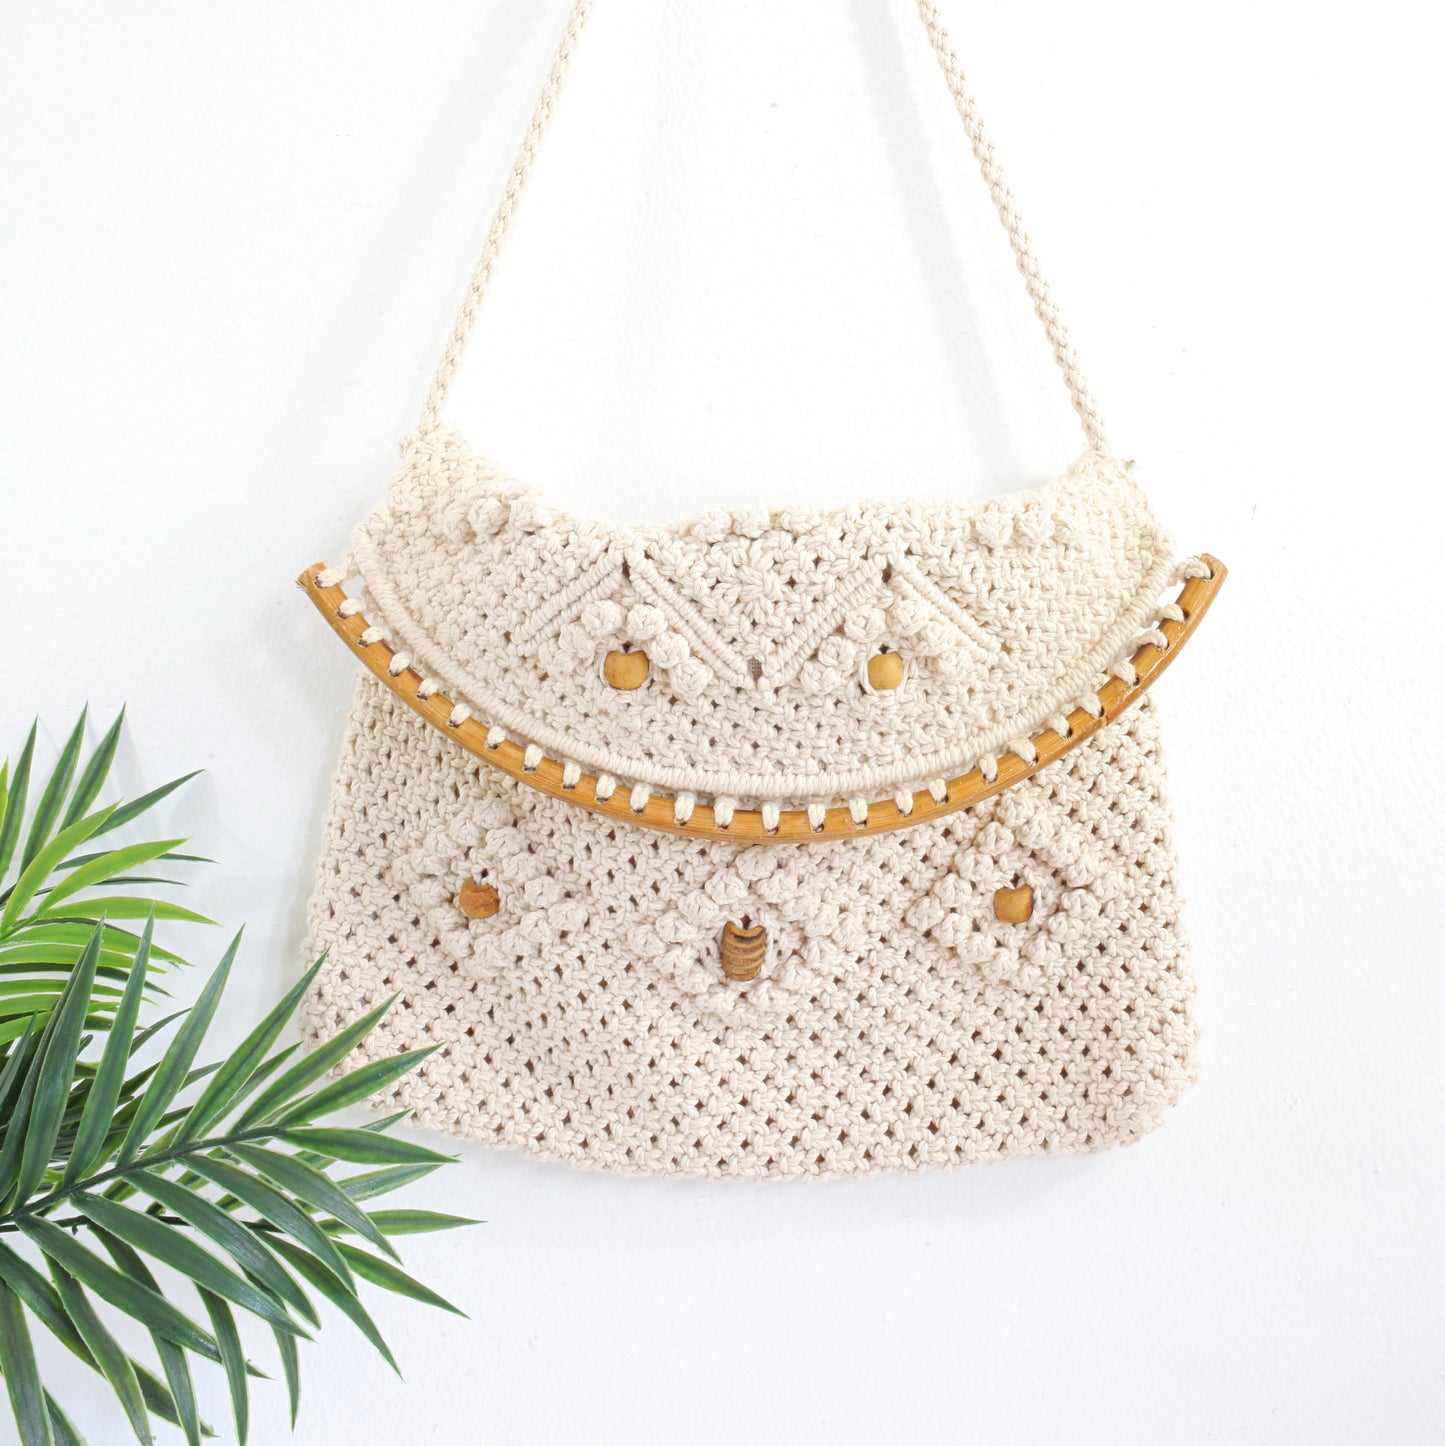 SOLD - Vintage Macrame Bag with Wooden Beads